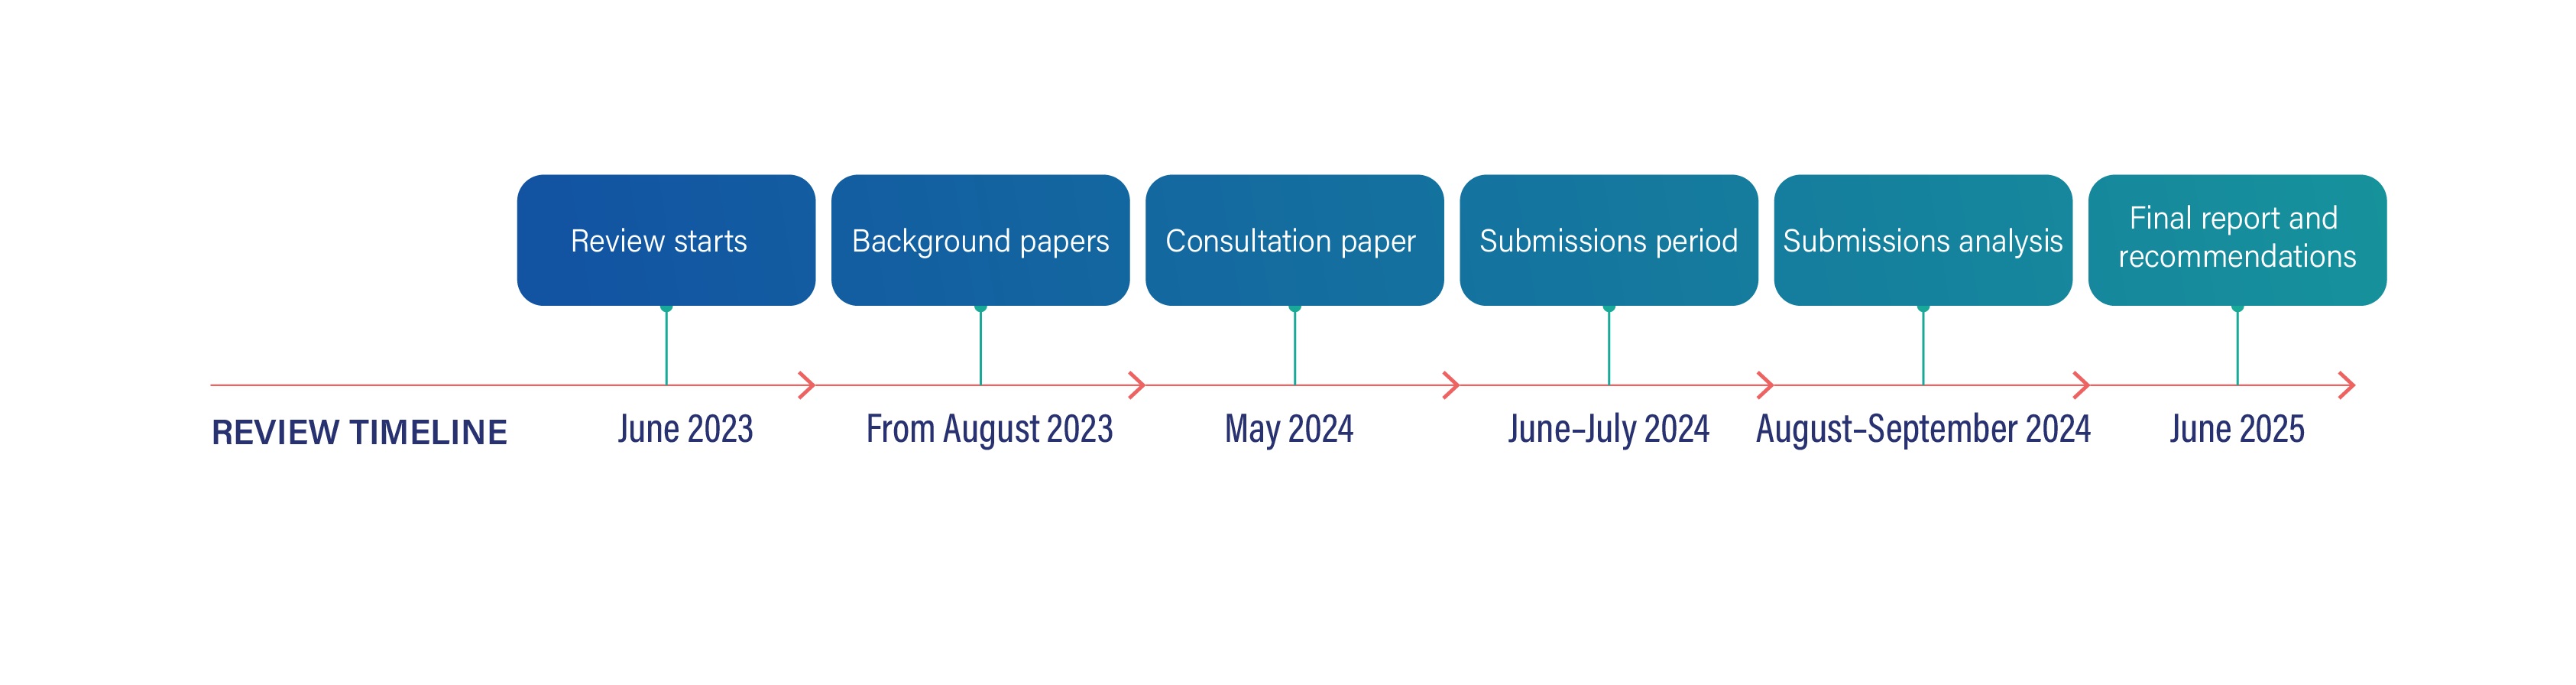 A timeline of the steps to be completed during the review and when we plan to complete them by.